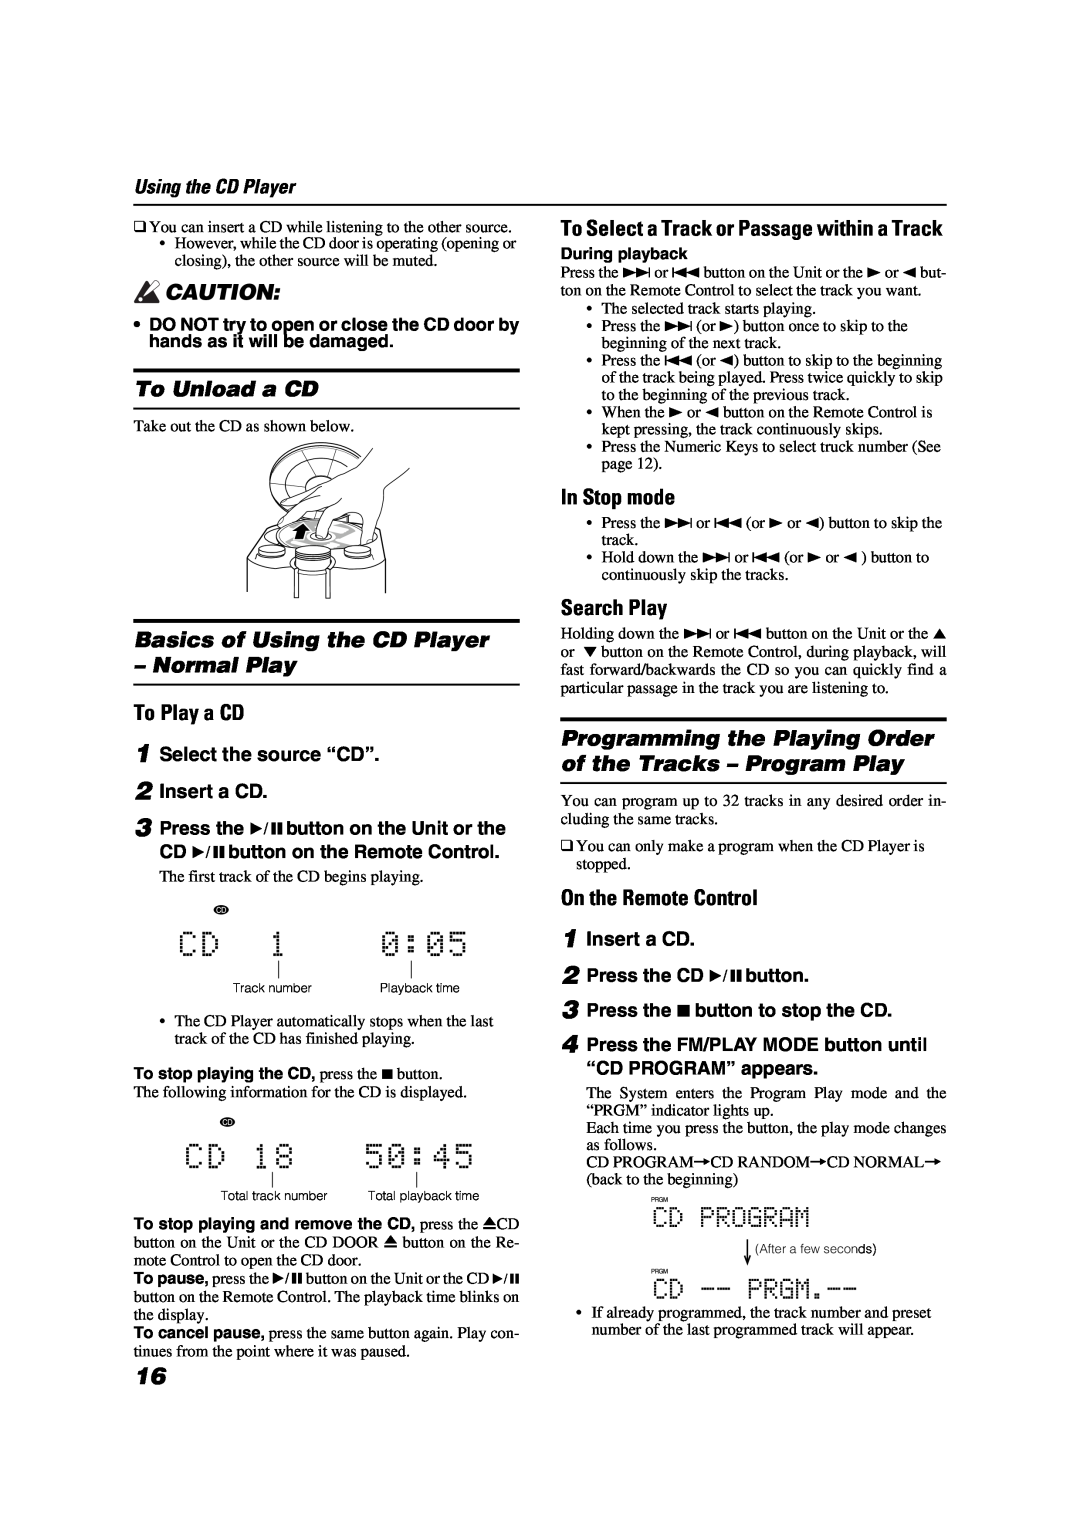 JVC FS-X1/FS-X3 manual To Unload a CD, Basics of Using the CD Player Normal Play, To Play a CD, In Stop mode, Search Play 